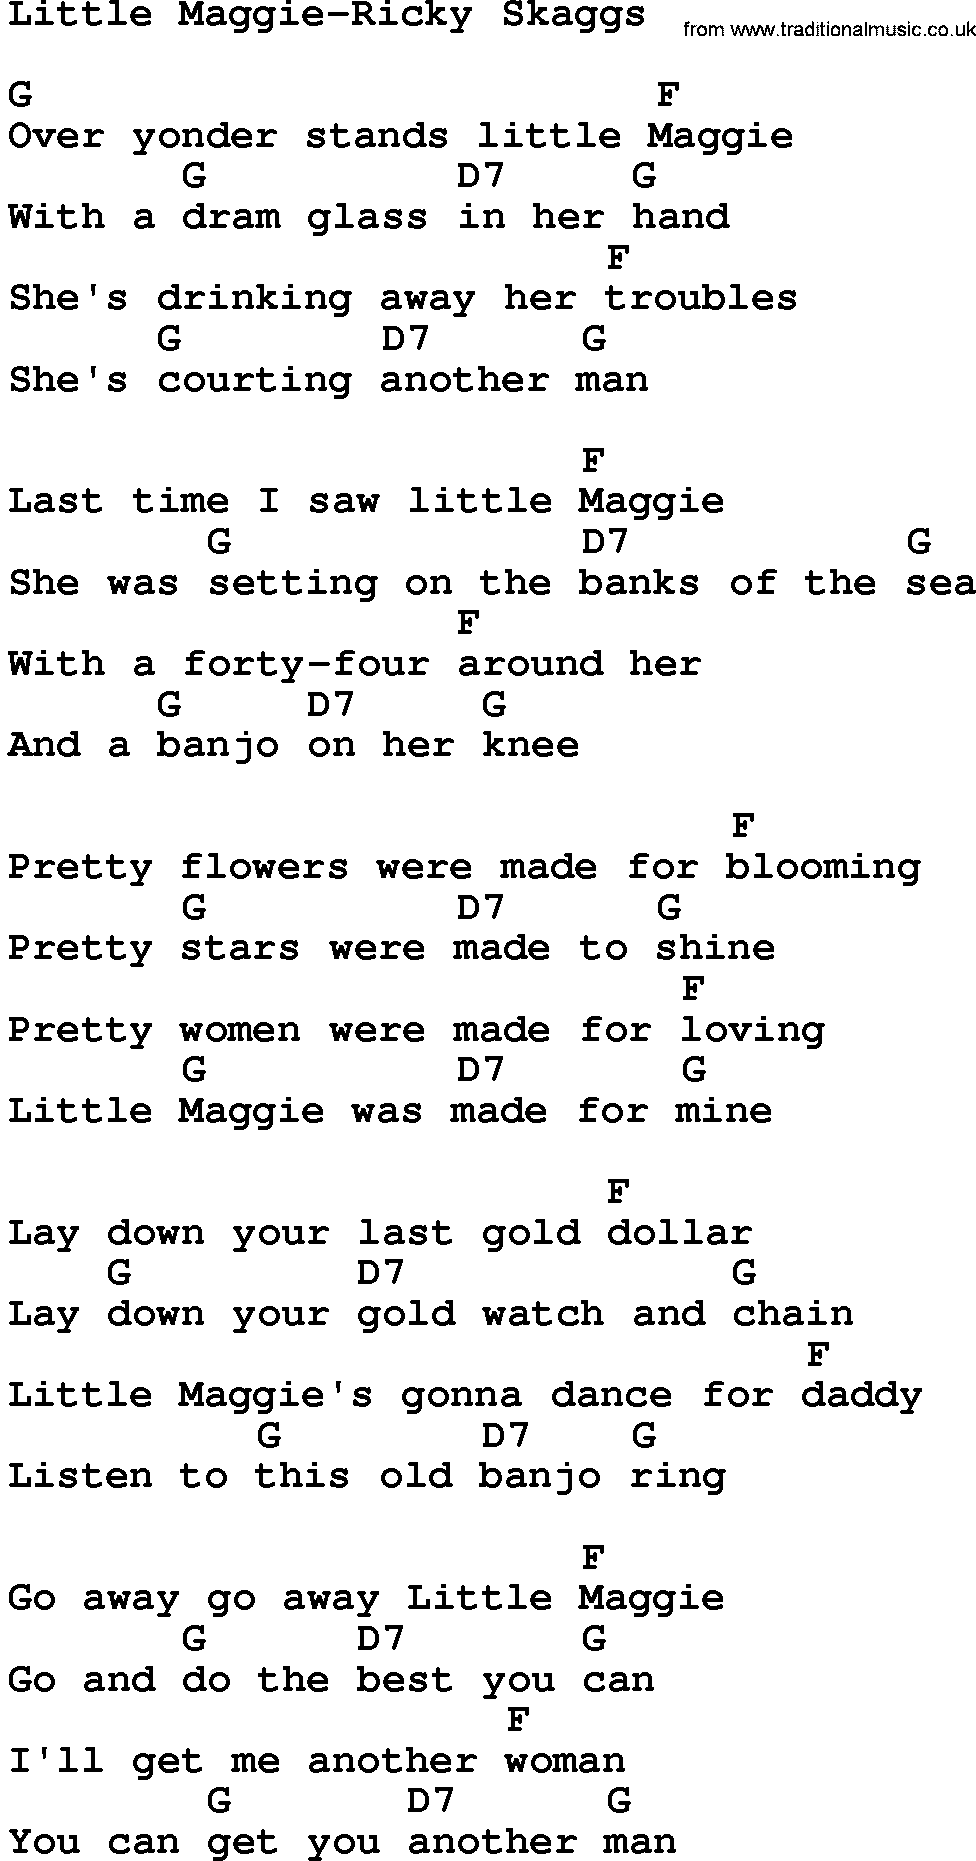 Country music song: Little Maggie-Ricky Skaggs lyrics and chords